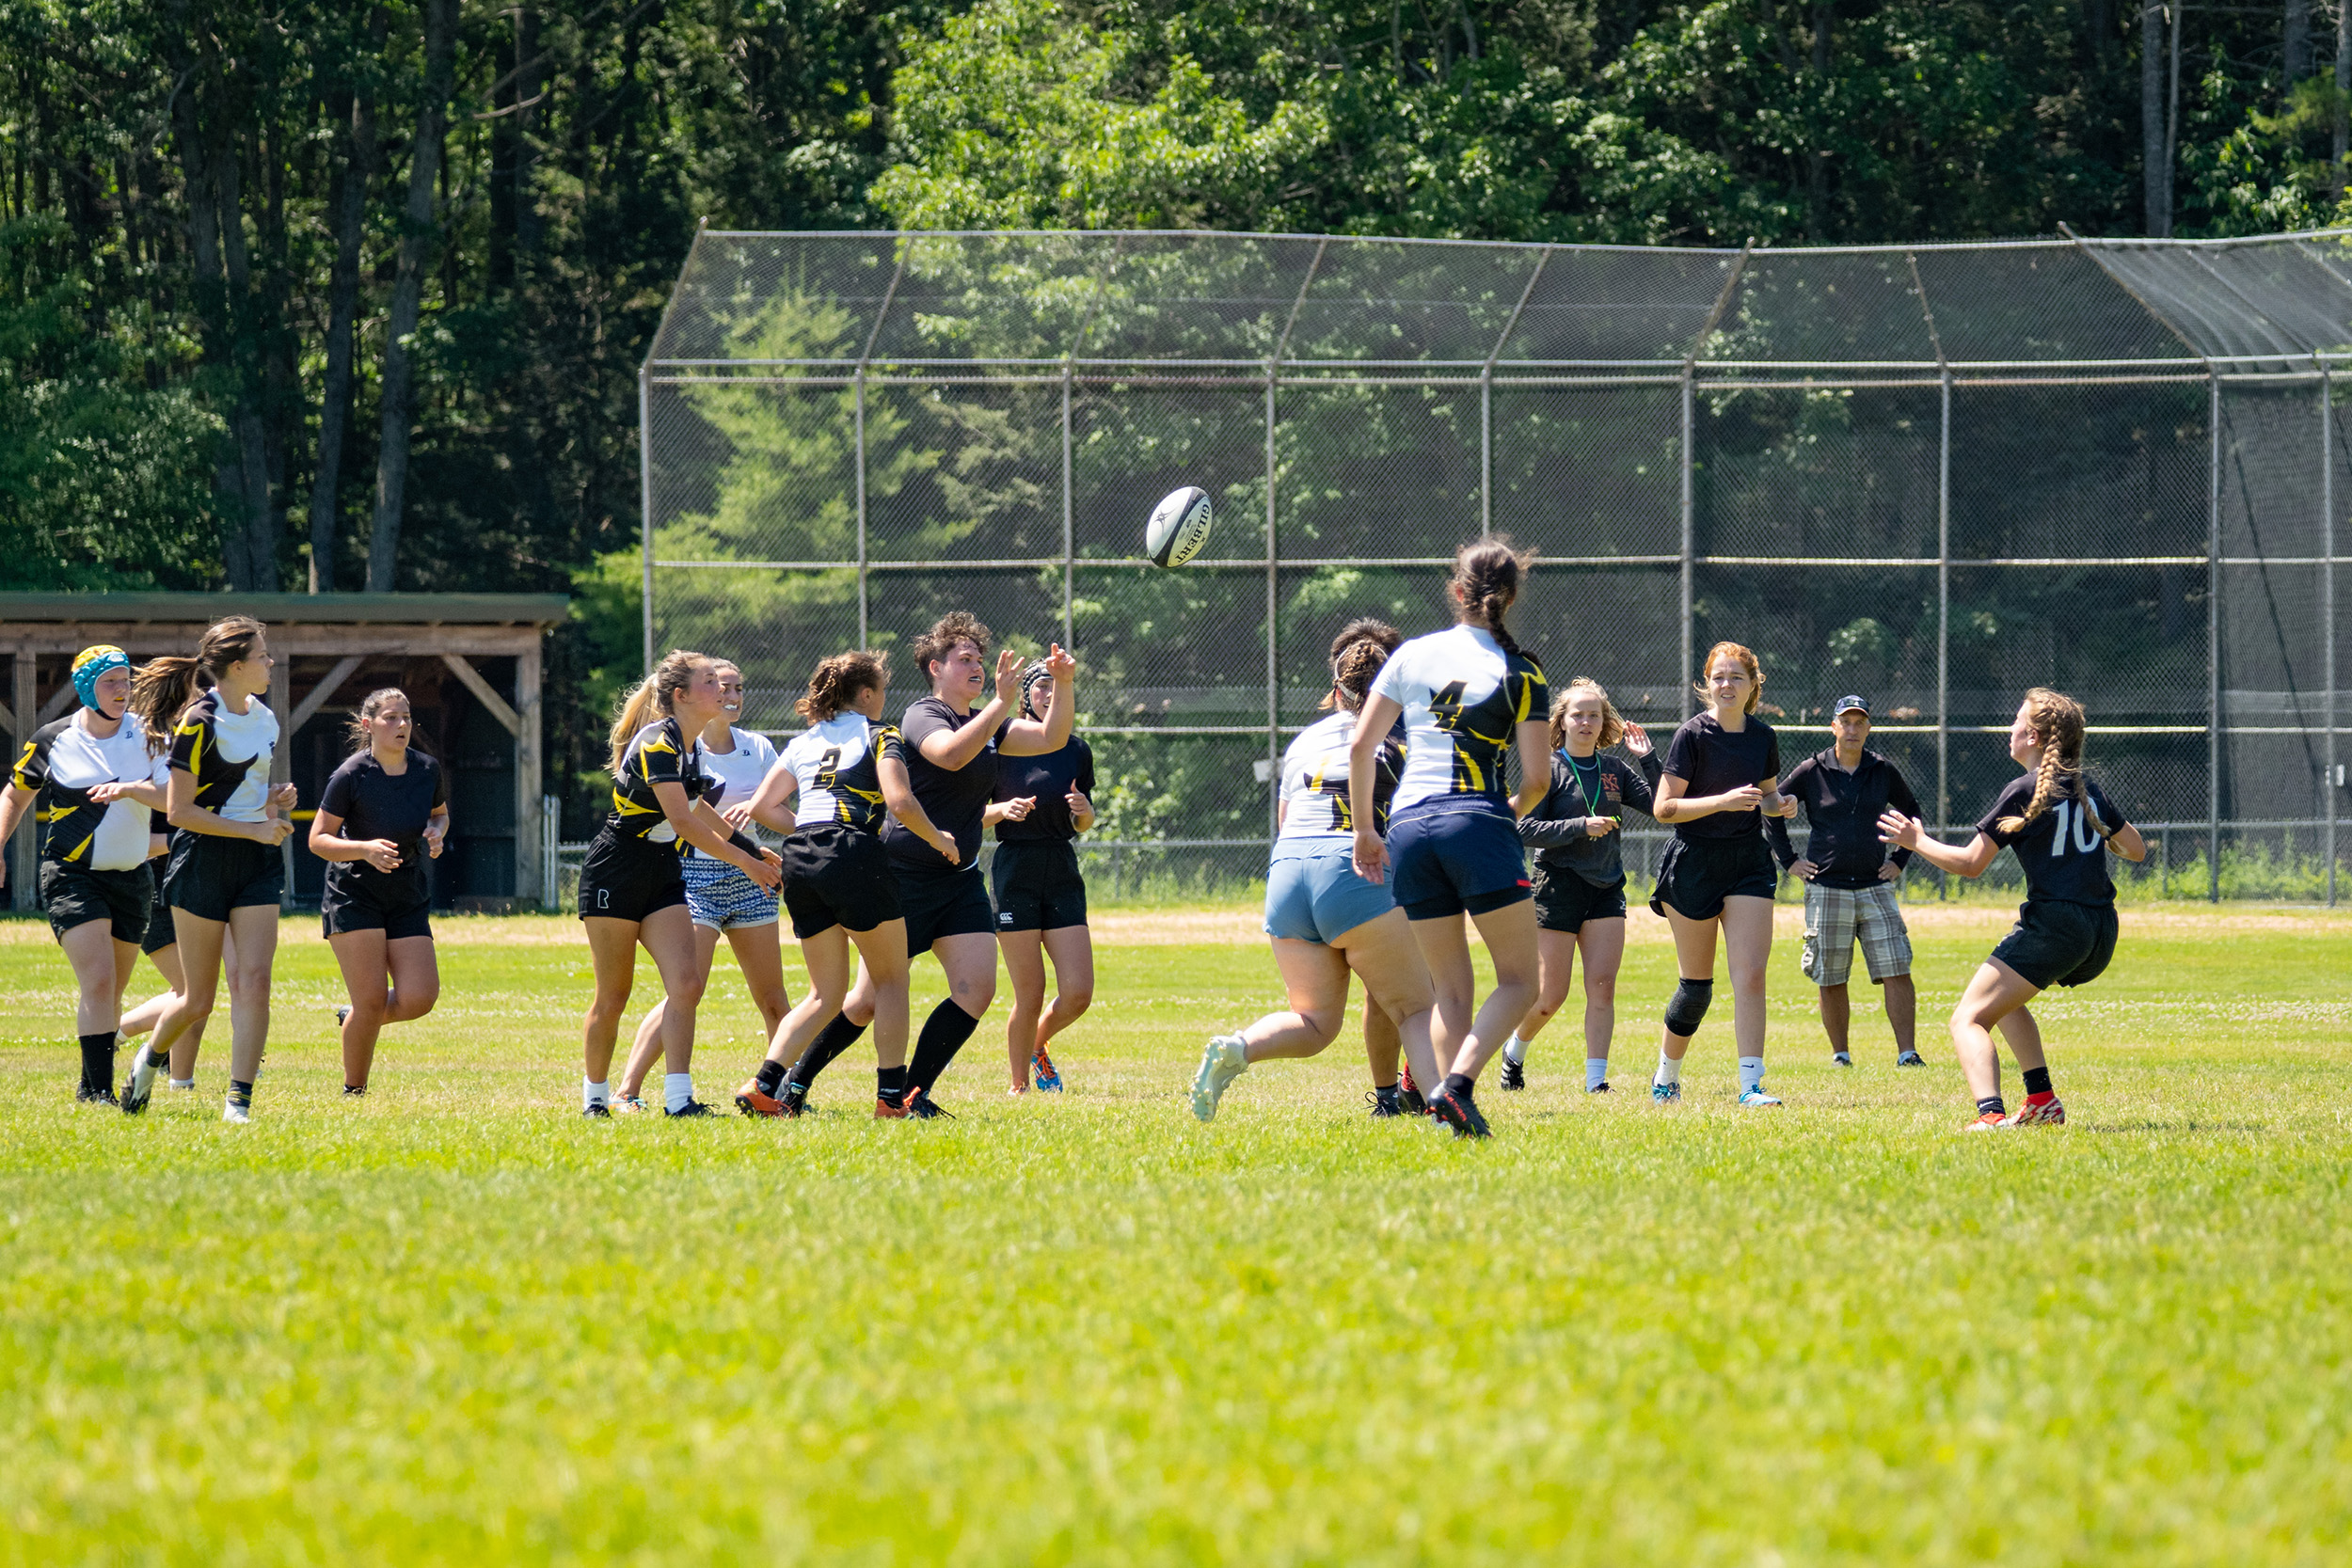 A team of players in black shirts versus a team in white shirts